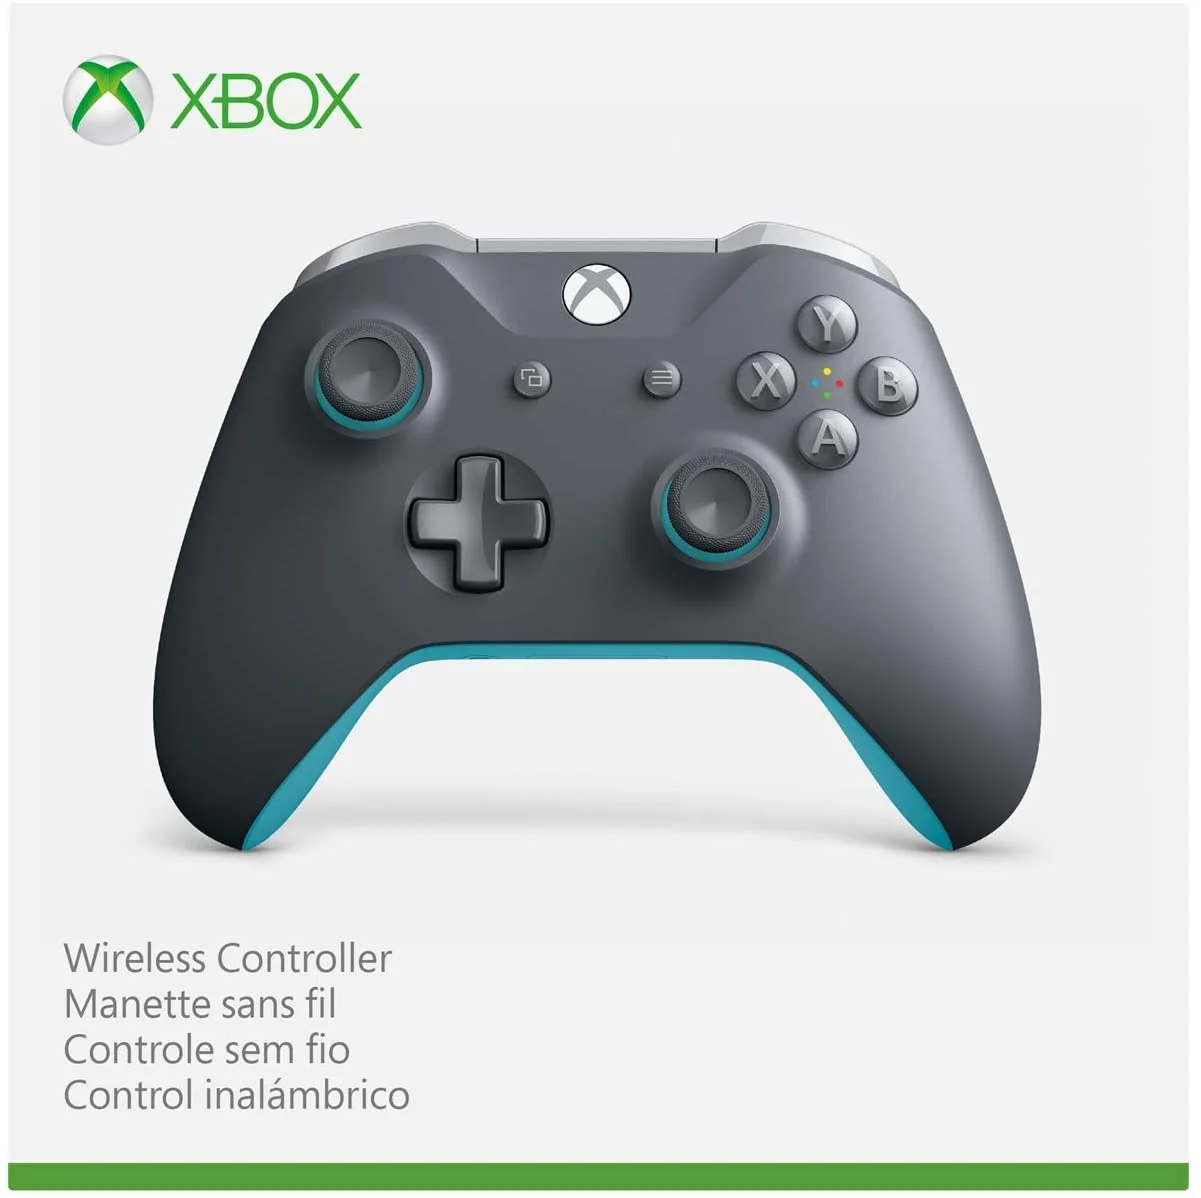  Microsoft Xbox One S Grey and Blue Controller [AM]